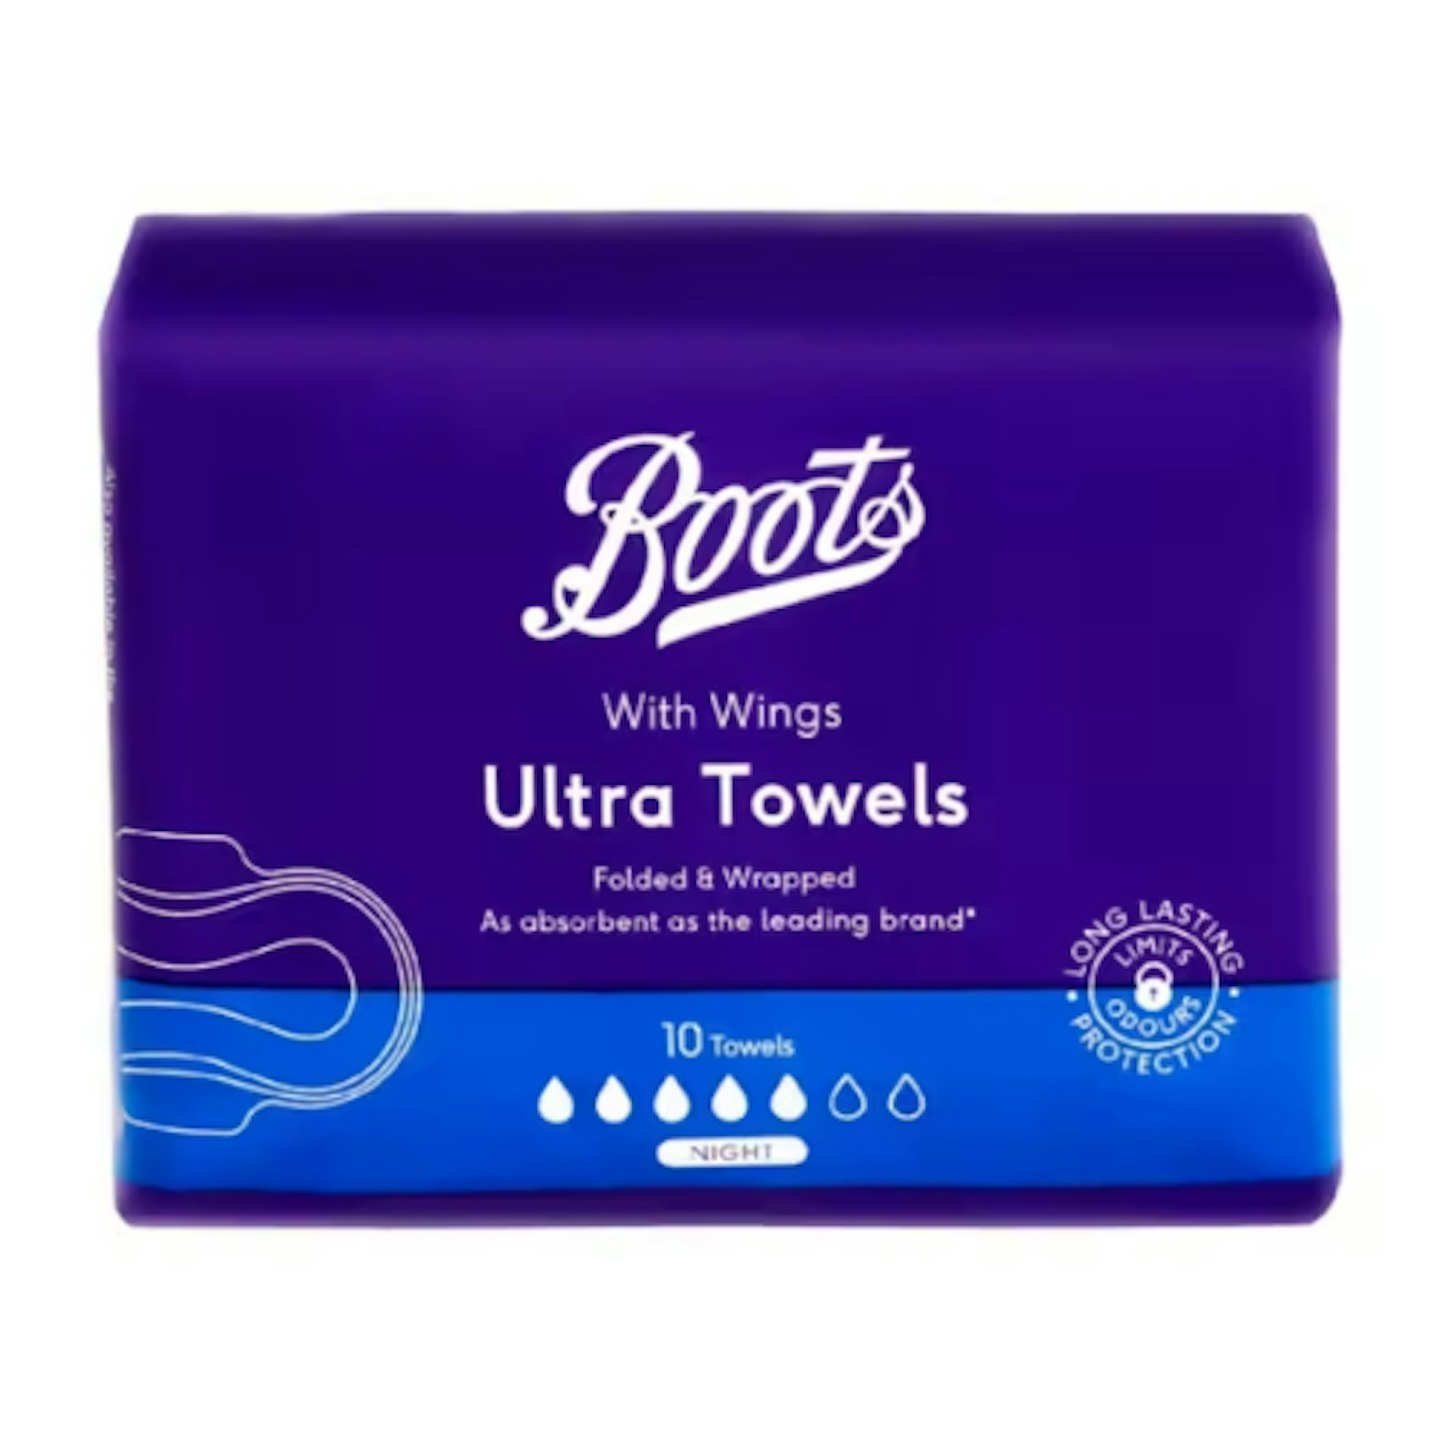 Boots everyday ultra towels night wing 10s